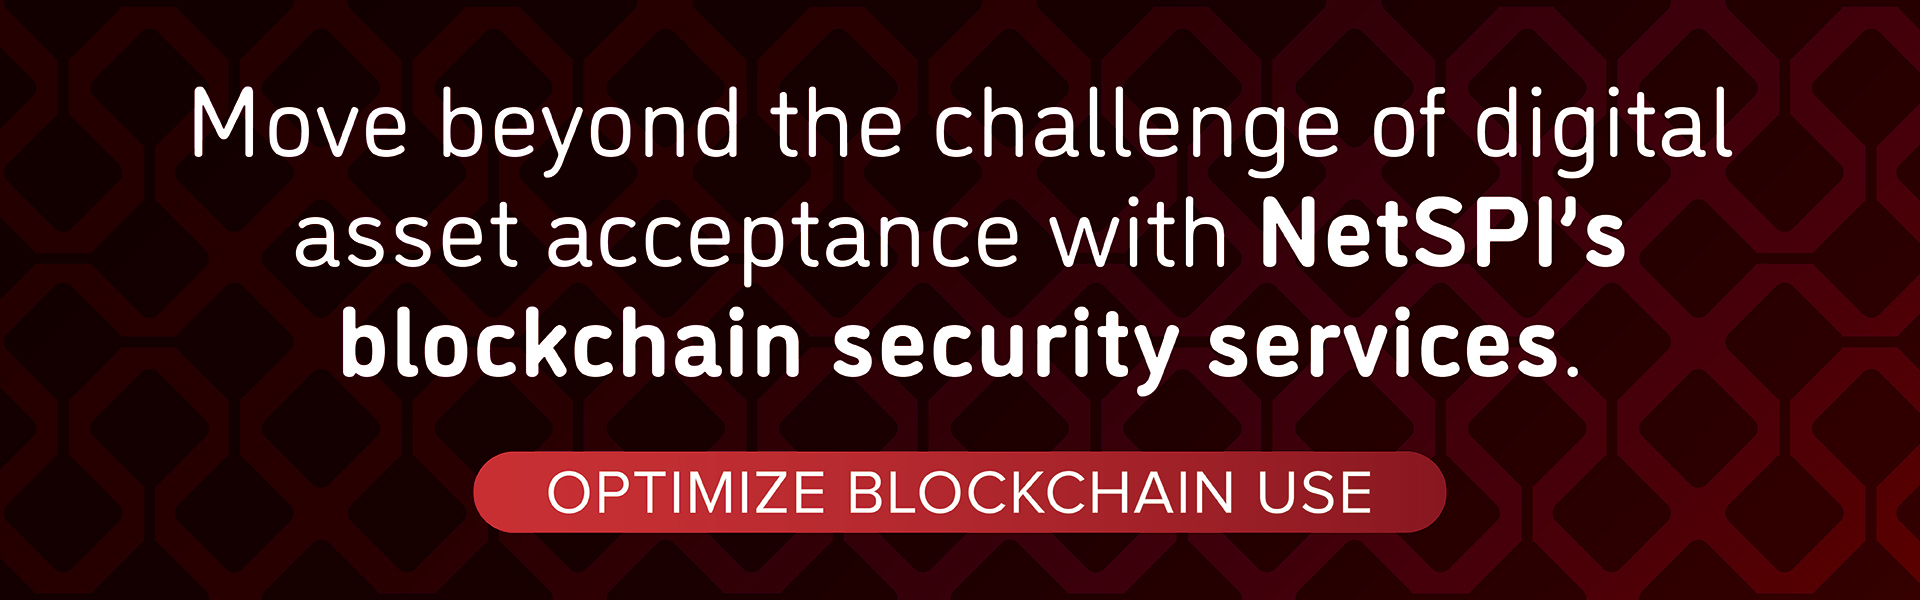 Move beyond the challenge of digital asset acceptance with NetSPI’s blockchain security services. Optimize Blockchain Use.